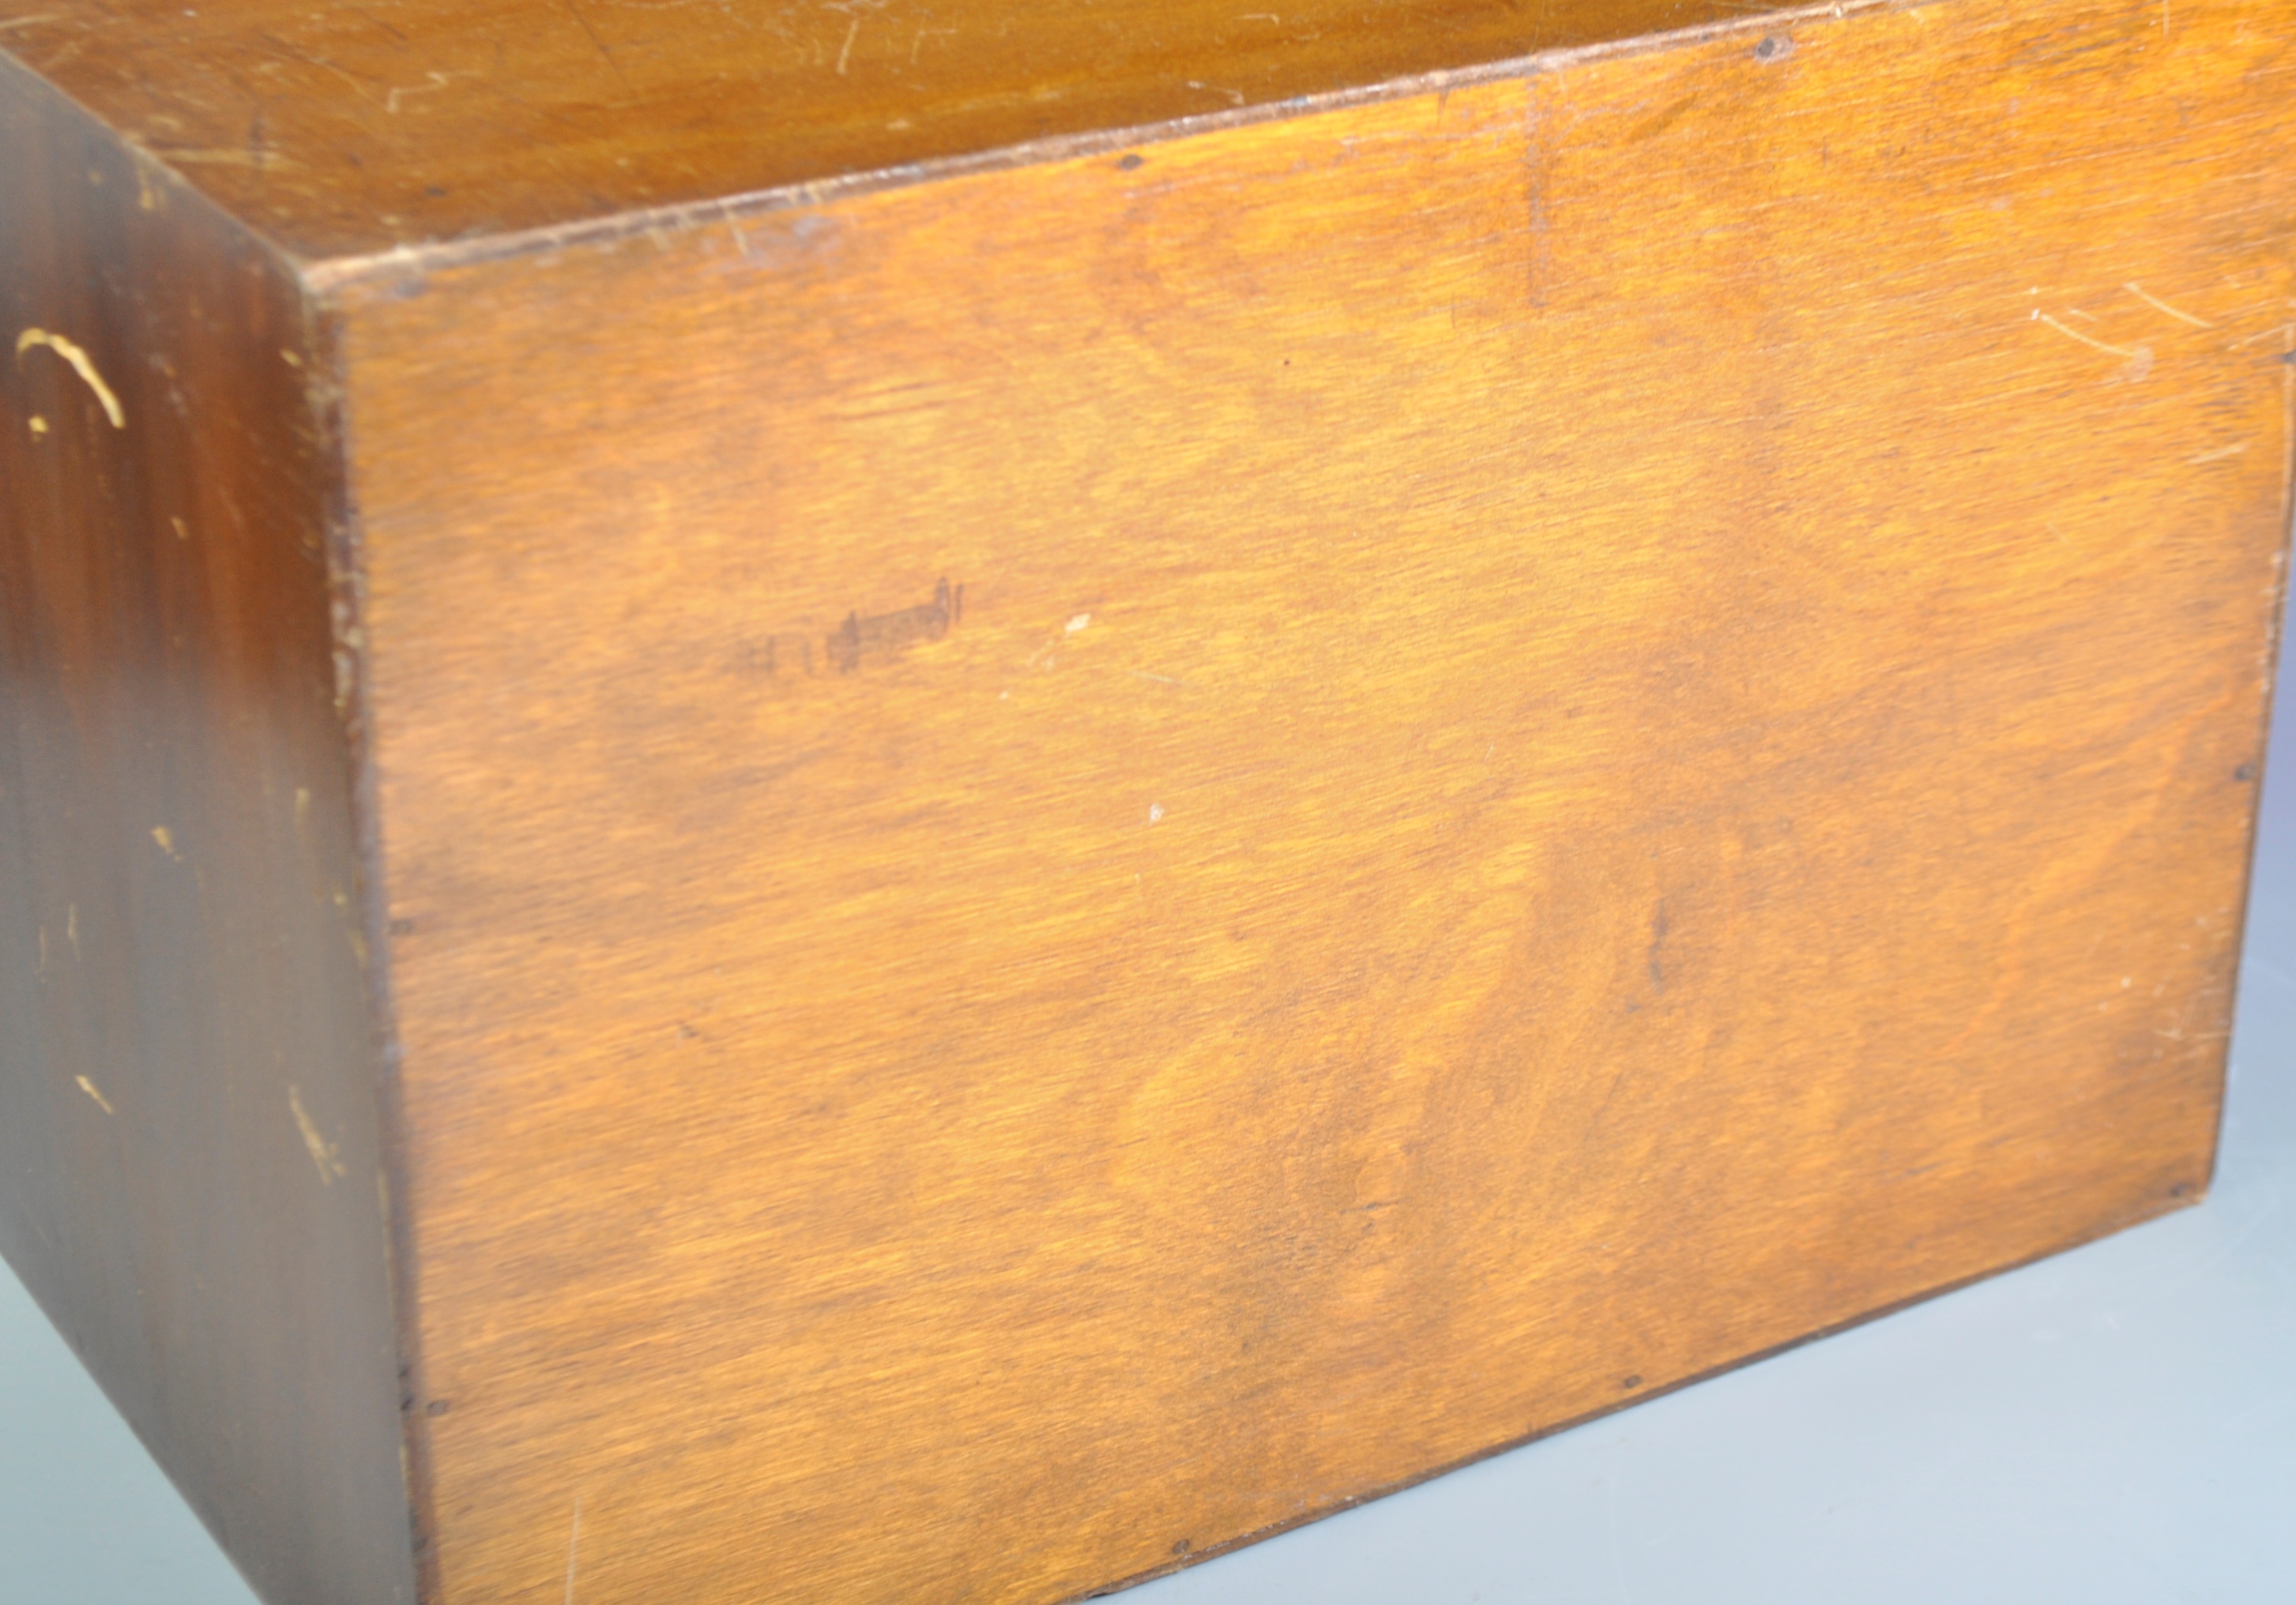 EARLY 20TH CENTURY OAK DESKTOP FILLING CABINET / CHEST OF DRAWERS - Image 8 of 8